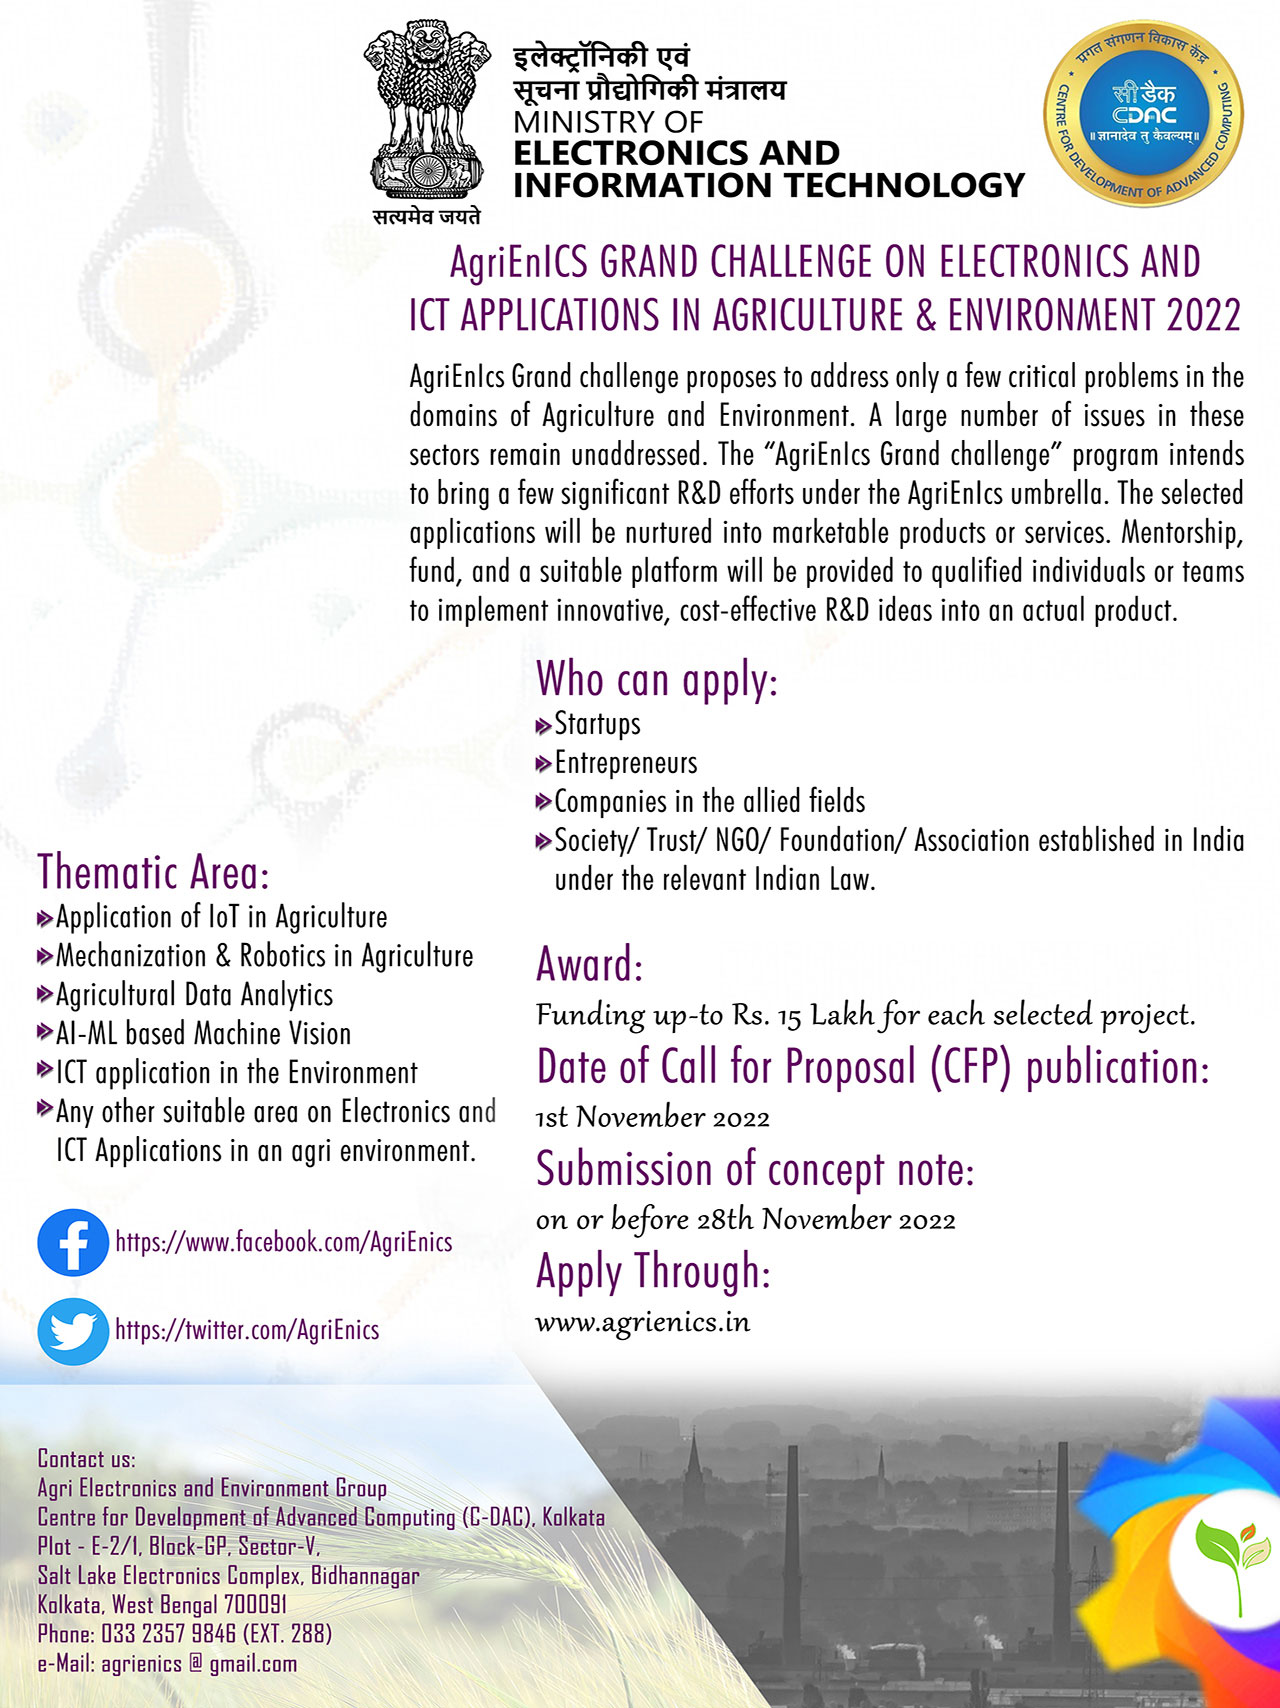 AgriEnICS GRAND CHALLENGE ON ELECTRONICS AND ICT APPLICATIONS IN AGRI, ENVIRONMENT 2022